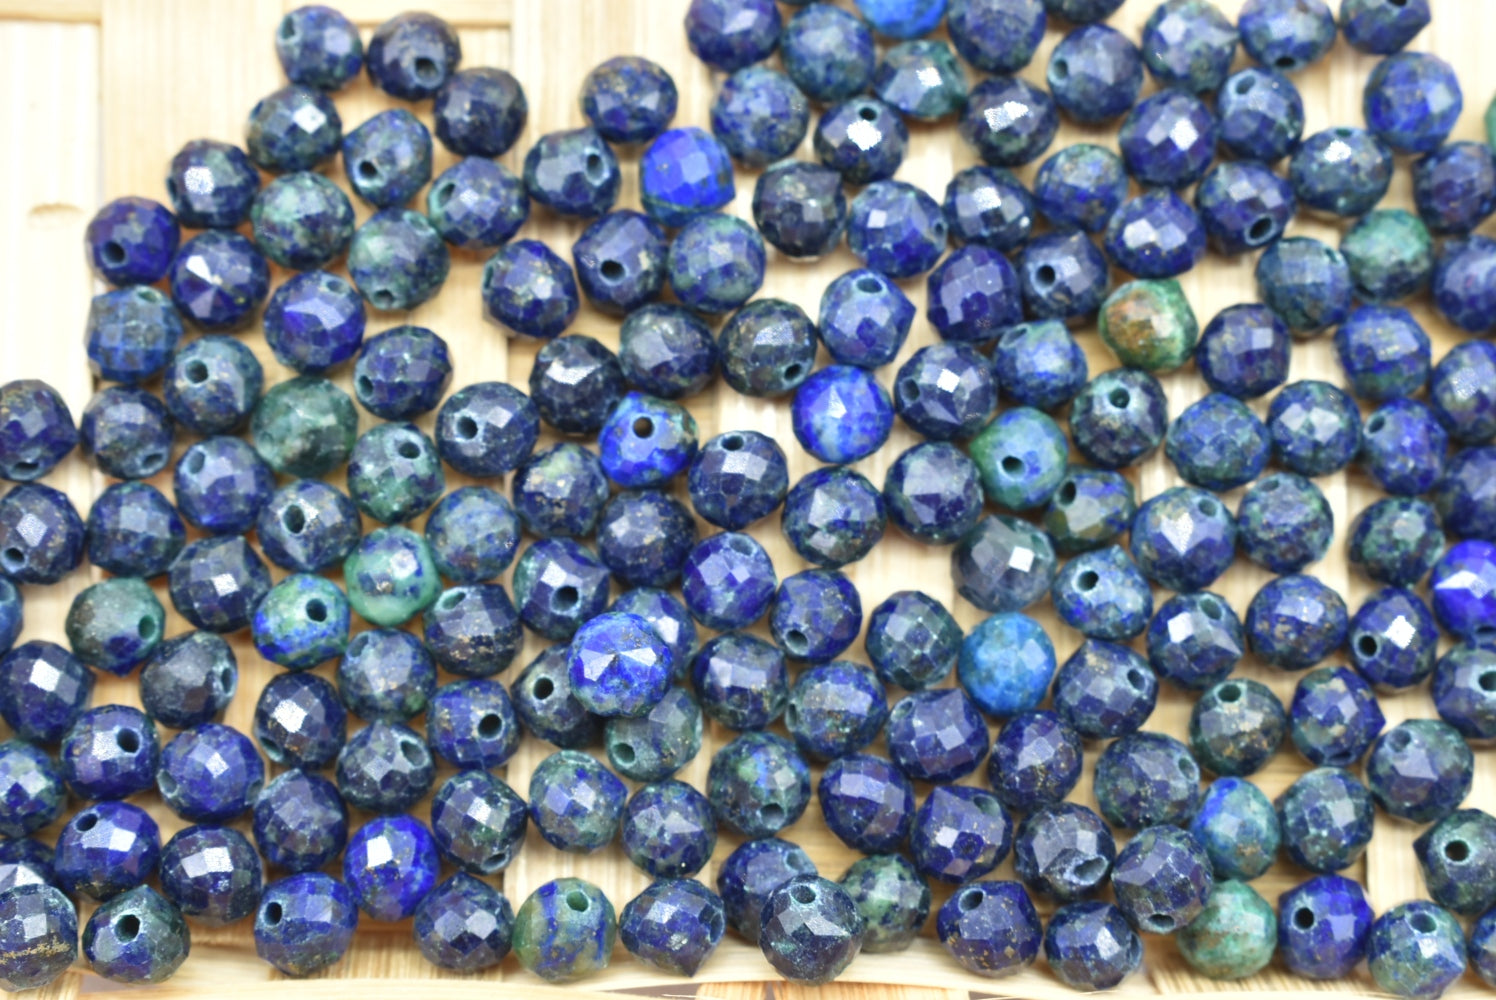 Chrysocolla and Lapis Lazuli Beads 4-5 mm Perforated - 3 Beads